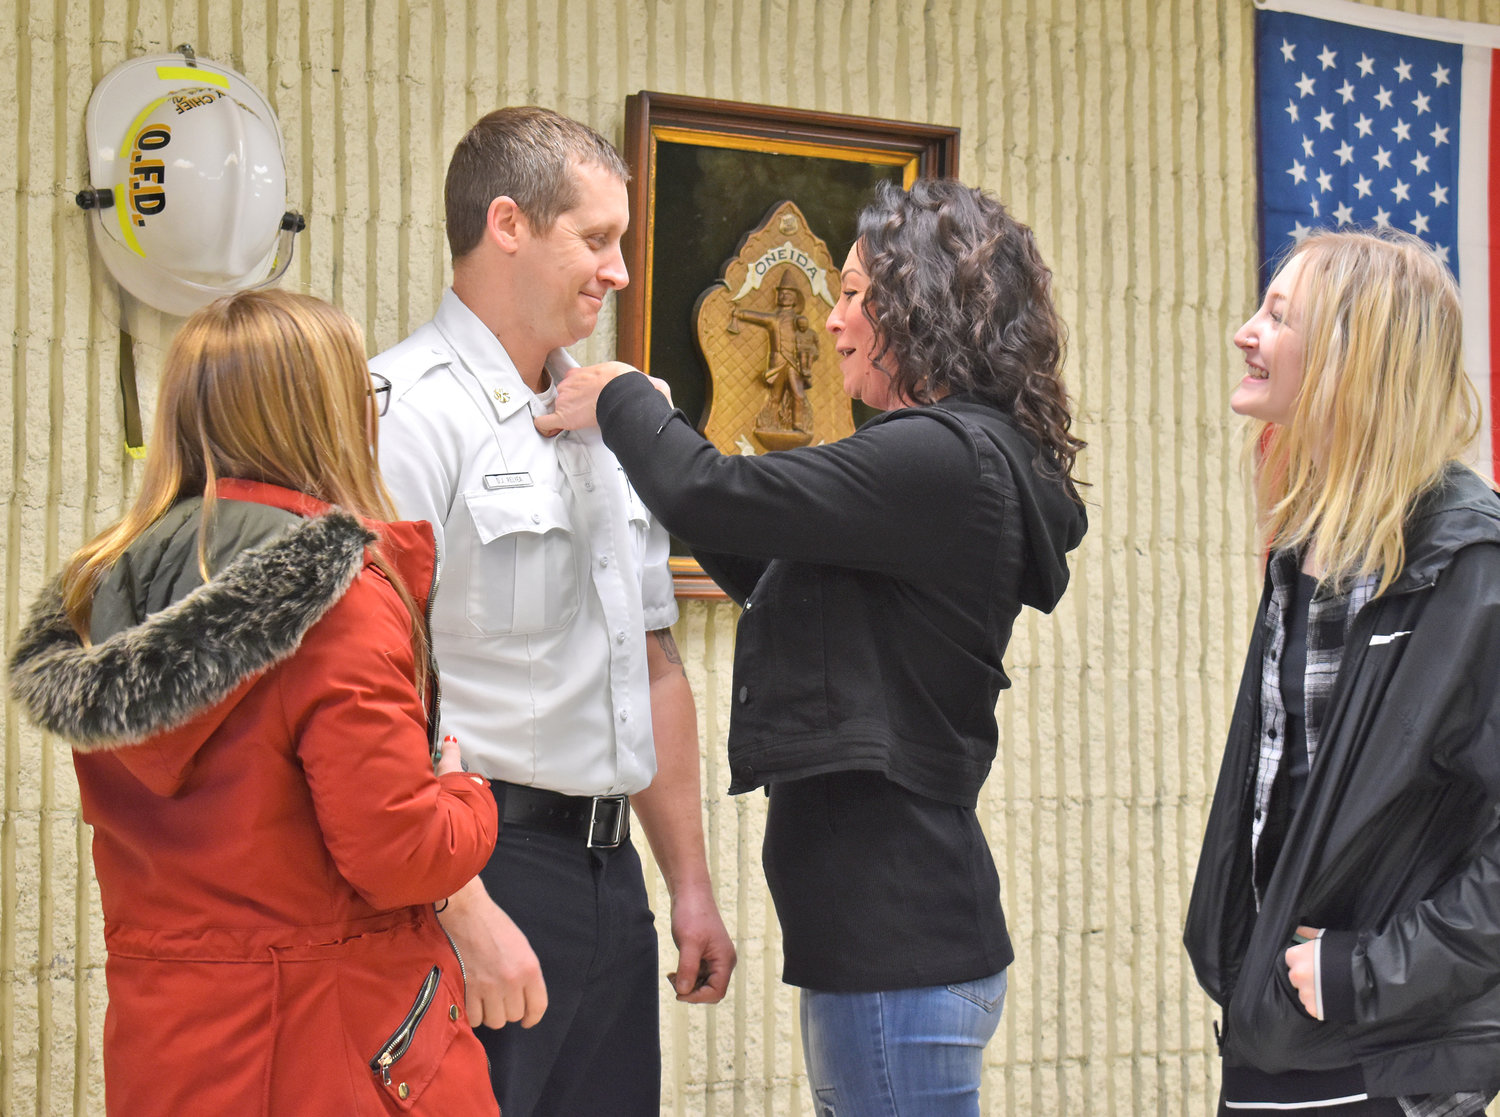 SWORN IN — Dennis Relyea smiles as his wife, Kendra, affixes a collar pin signifying Relyea’s new rank in the Oneida Fire Department. Relyea, a 12-year member of the department, was appointed as deputy chief. He had previously held the rank of lieutenant. Looking on are the couple’s daughters, Natalie, left, and Kayla Rose-Richmond, right.